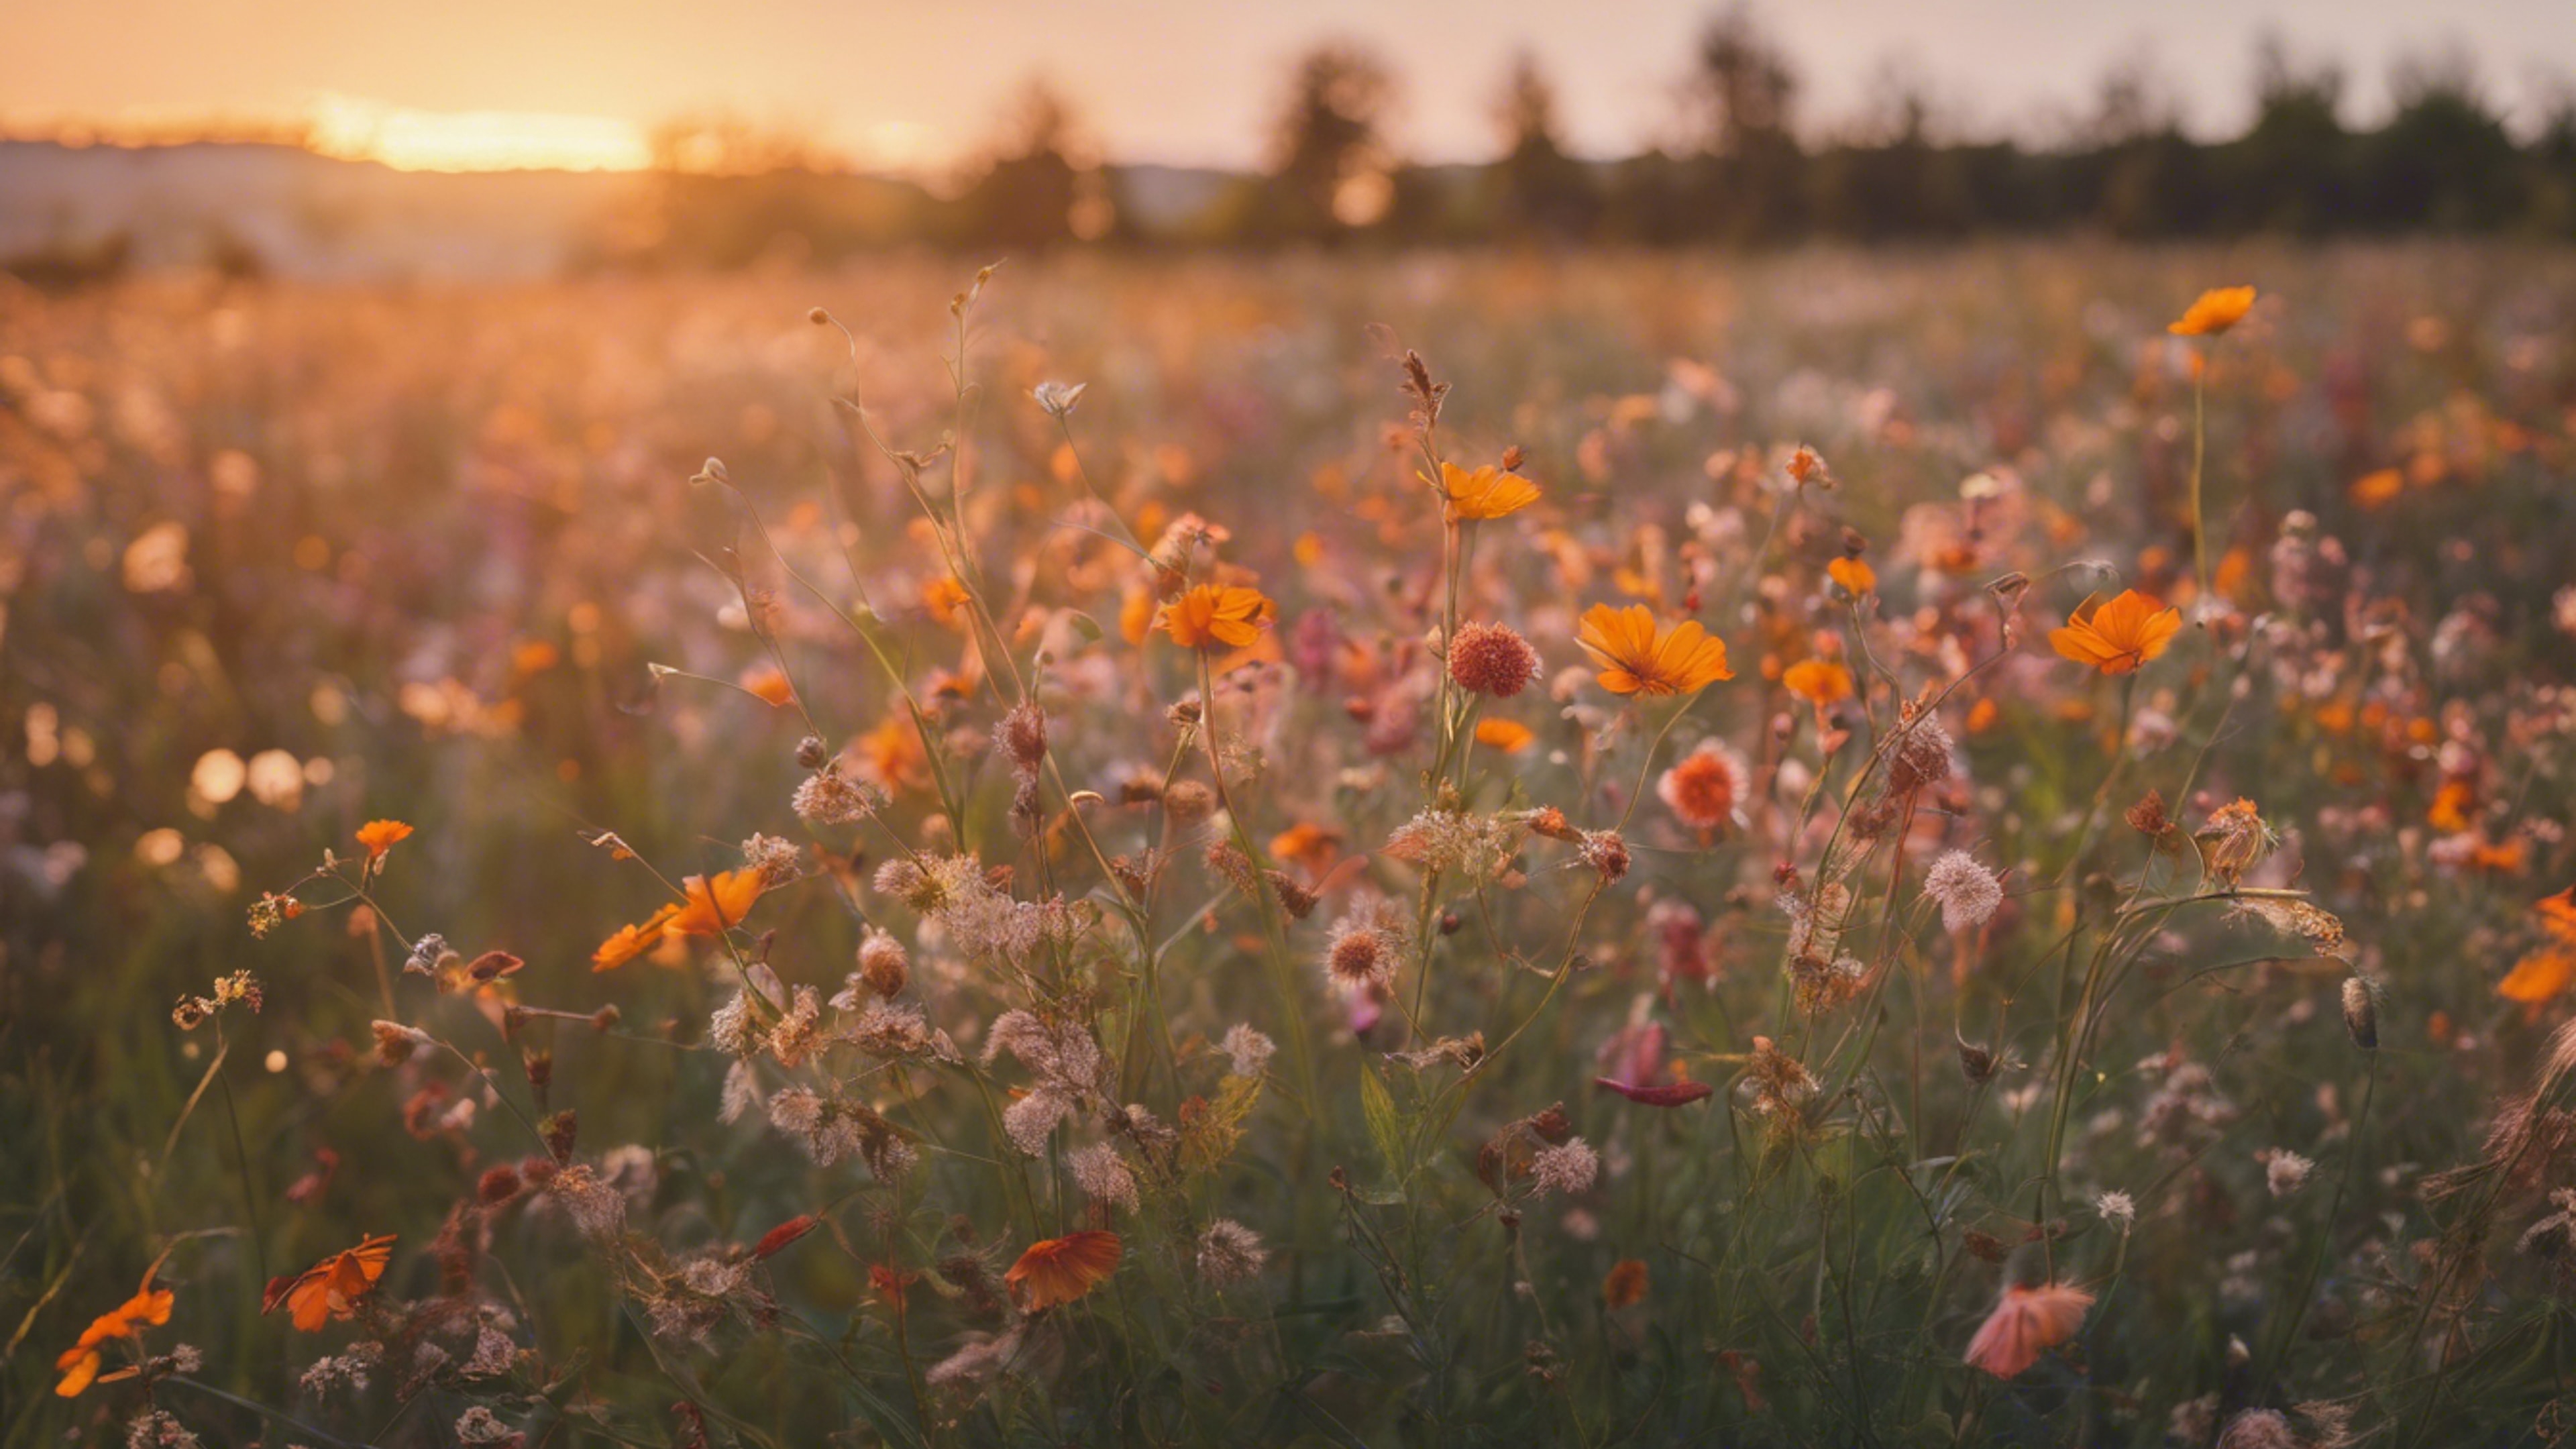 A nostalgic field of wildflowers in sunset hues. Tapetai[1a5d684a5d8746a6914f]